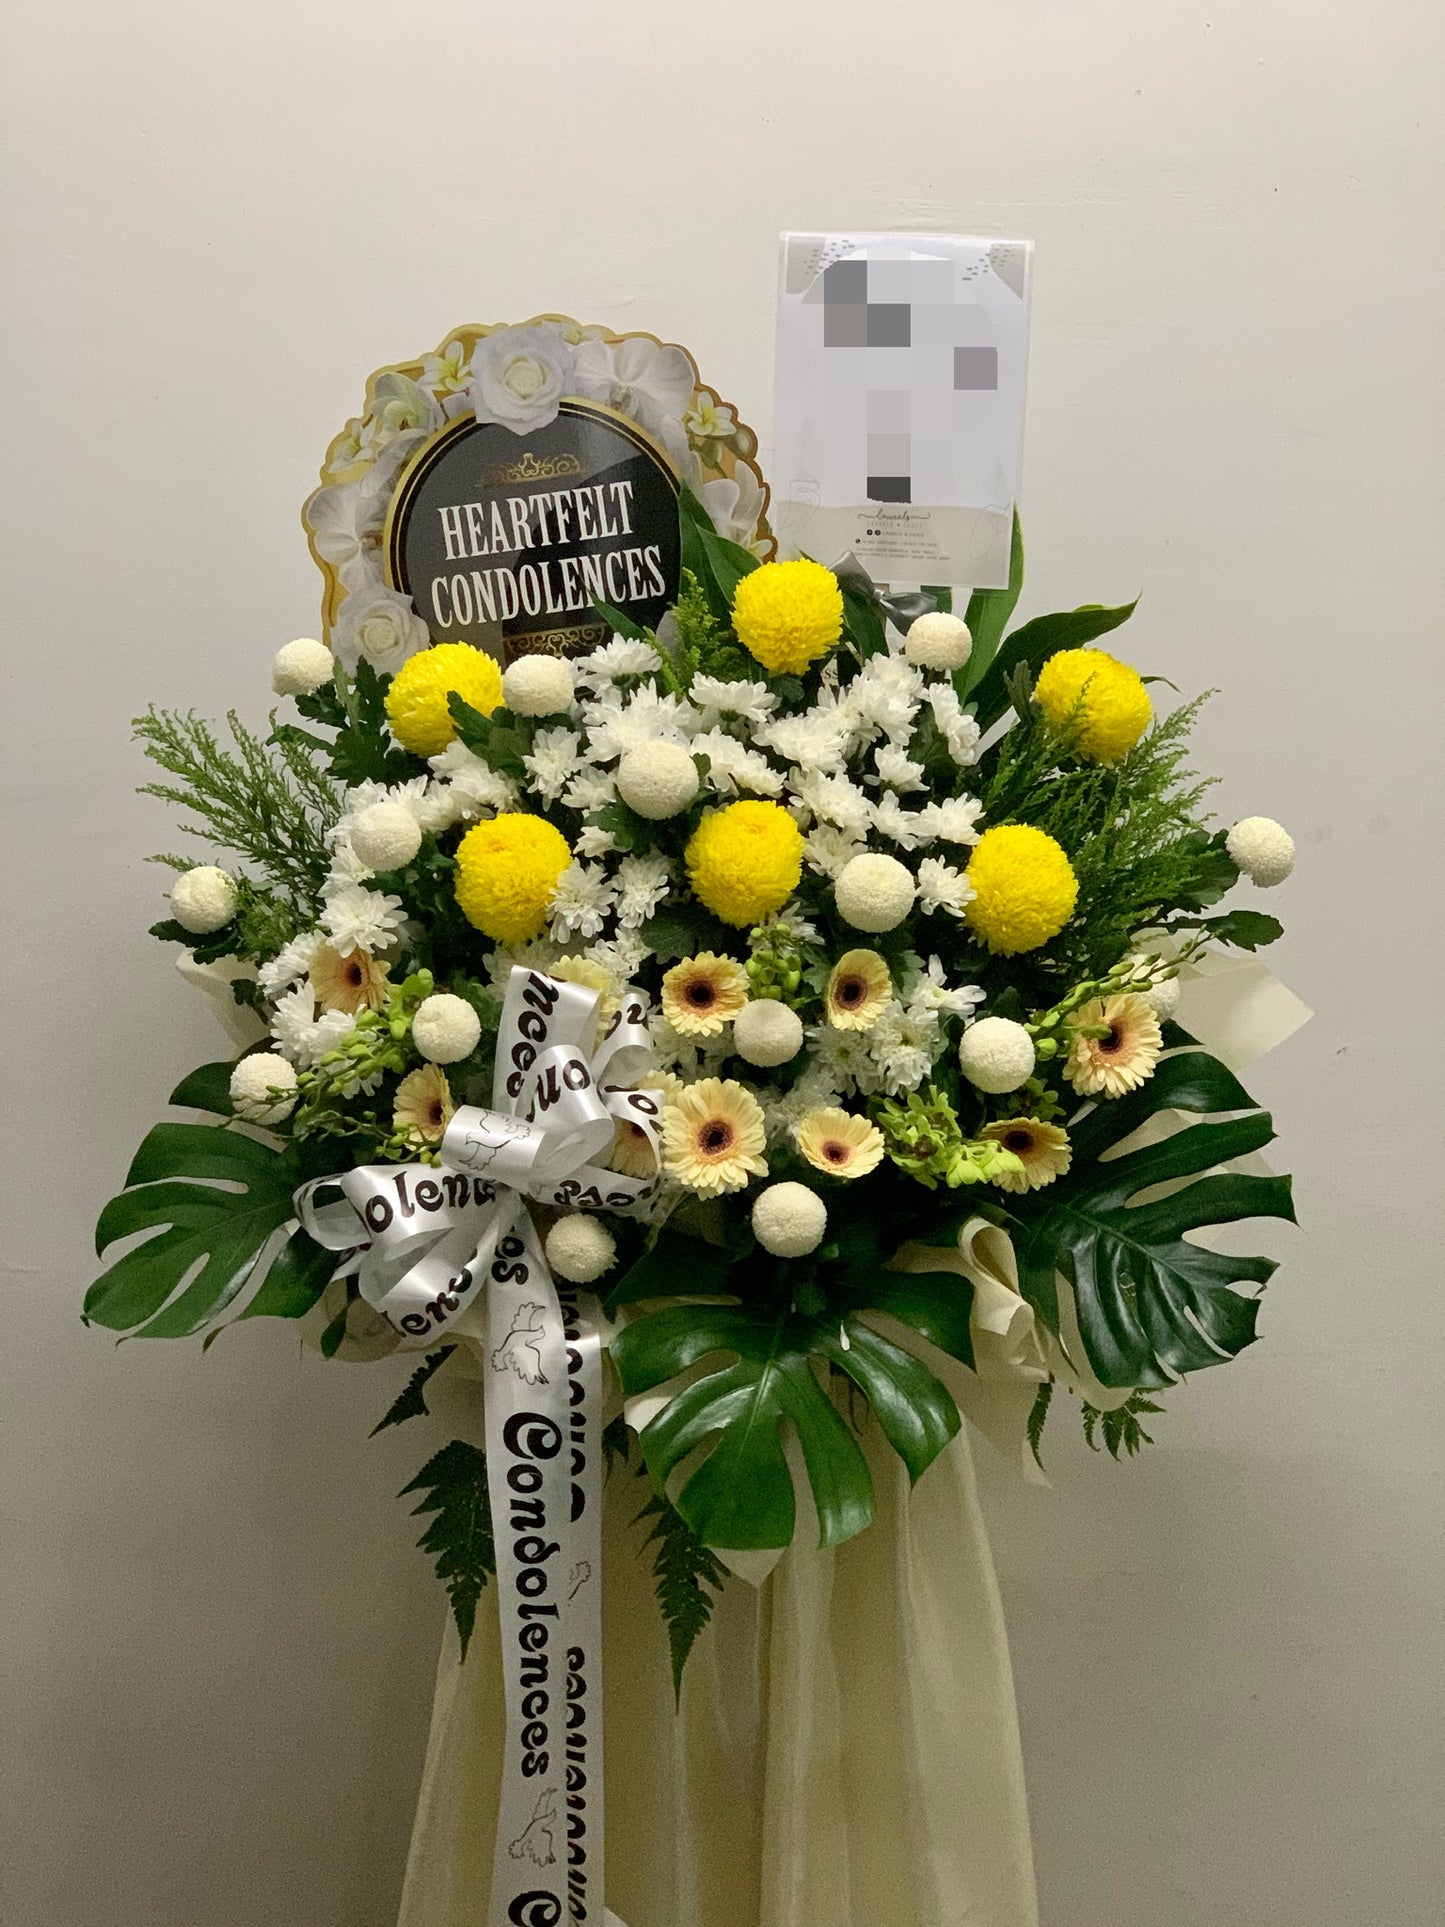 Hushed Tribute Condolences Flower Stand